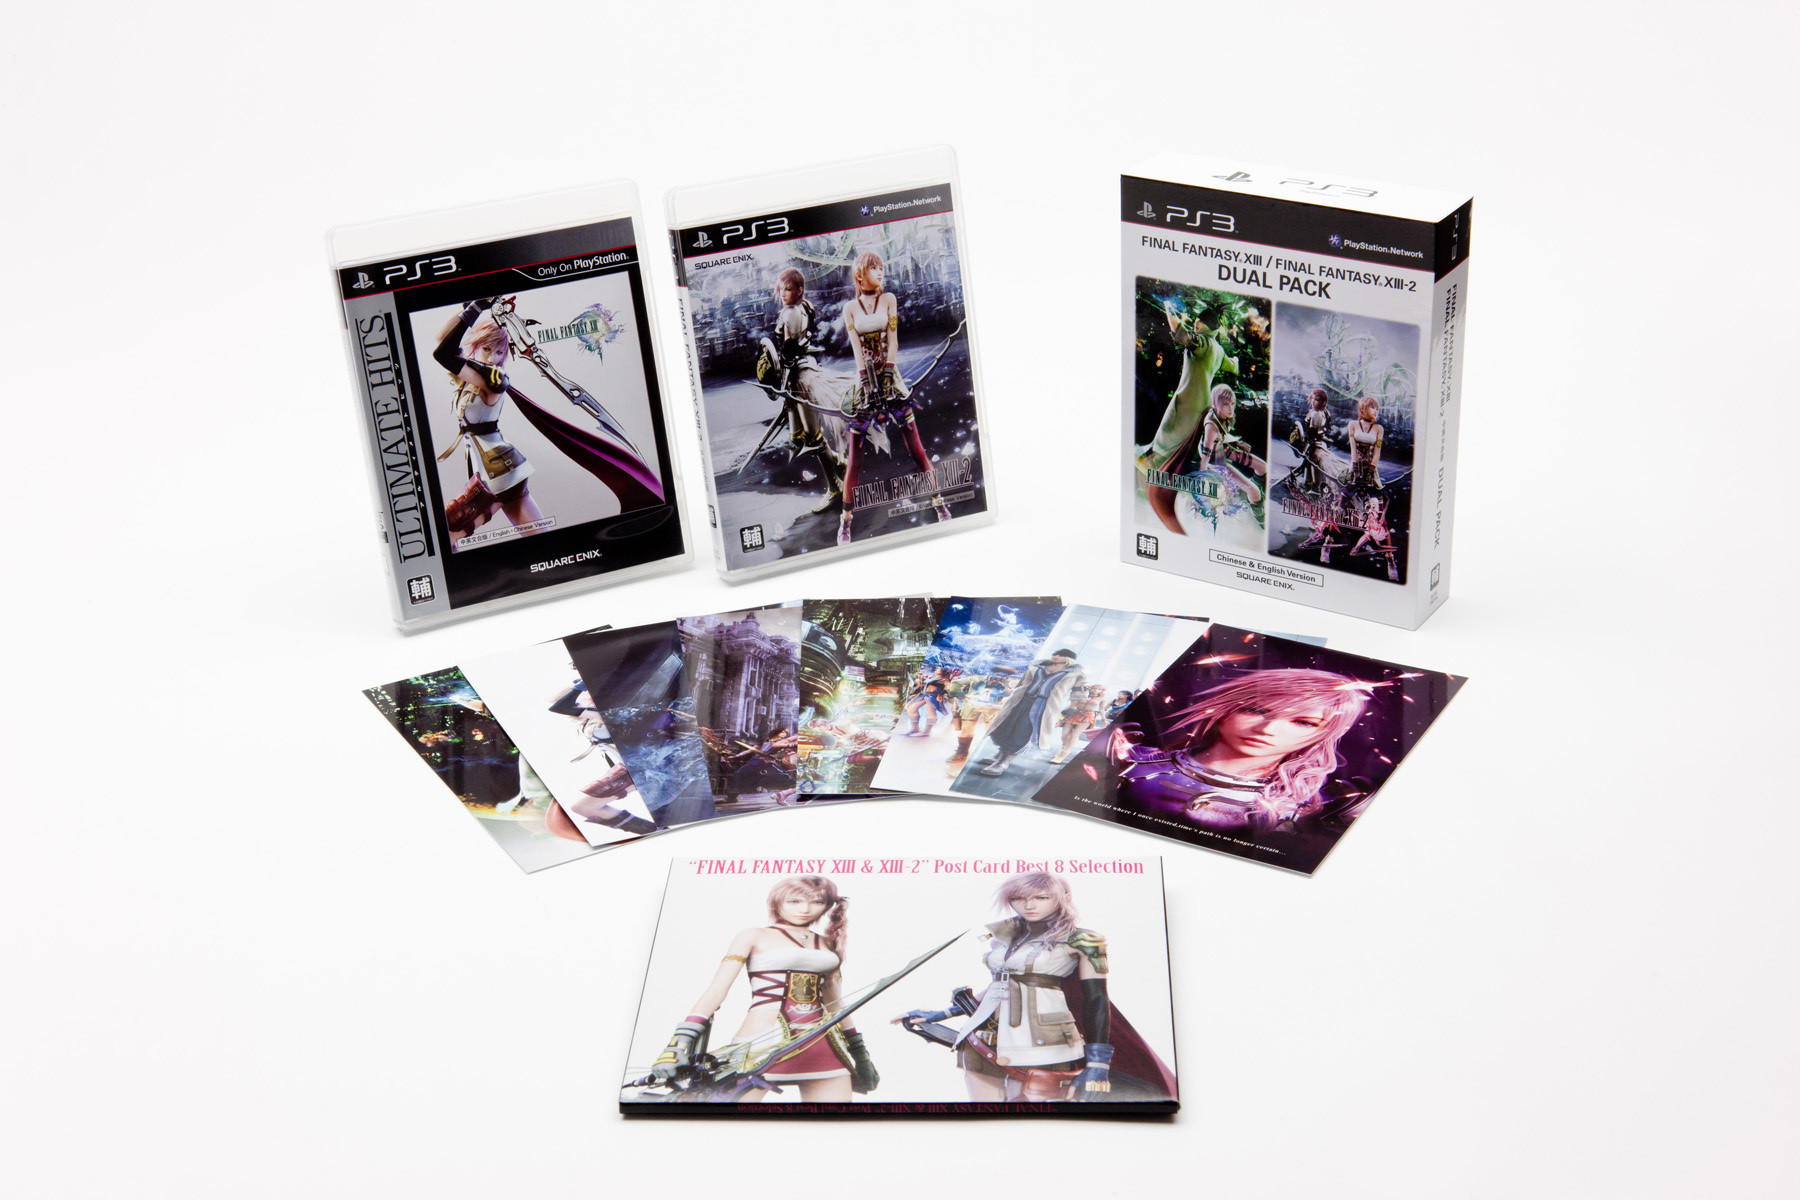 Ps3 final. Final Fantasy 13 ps3. Ps3 Limited Edition Final Fantasy. Ff13-2 ps3. Диск ps3 Final Fantasy XIII новая.